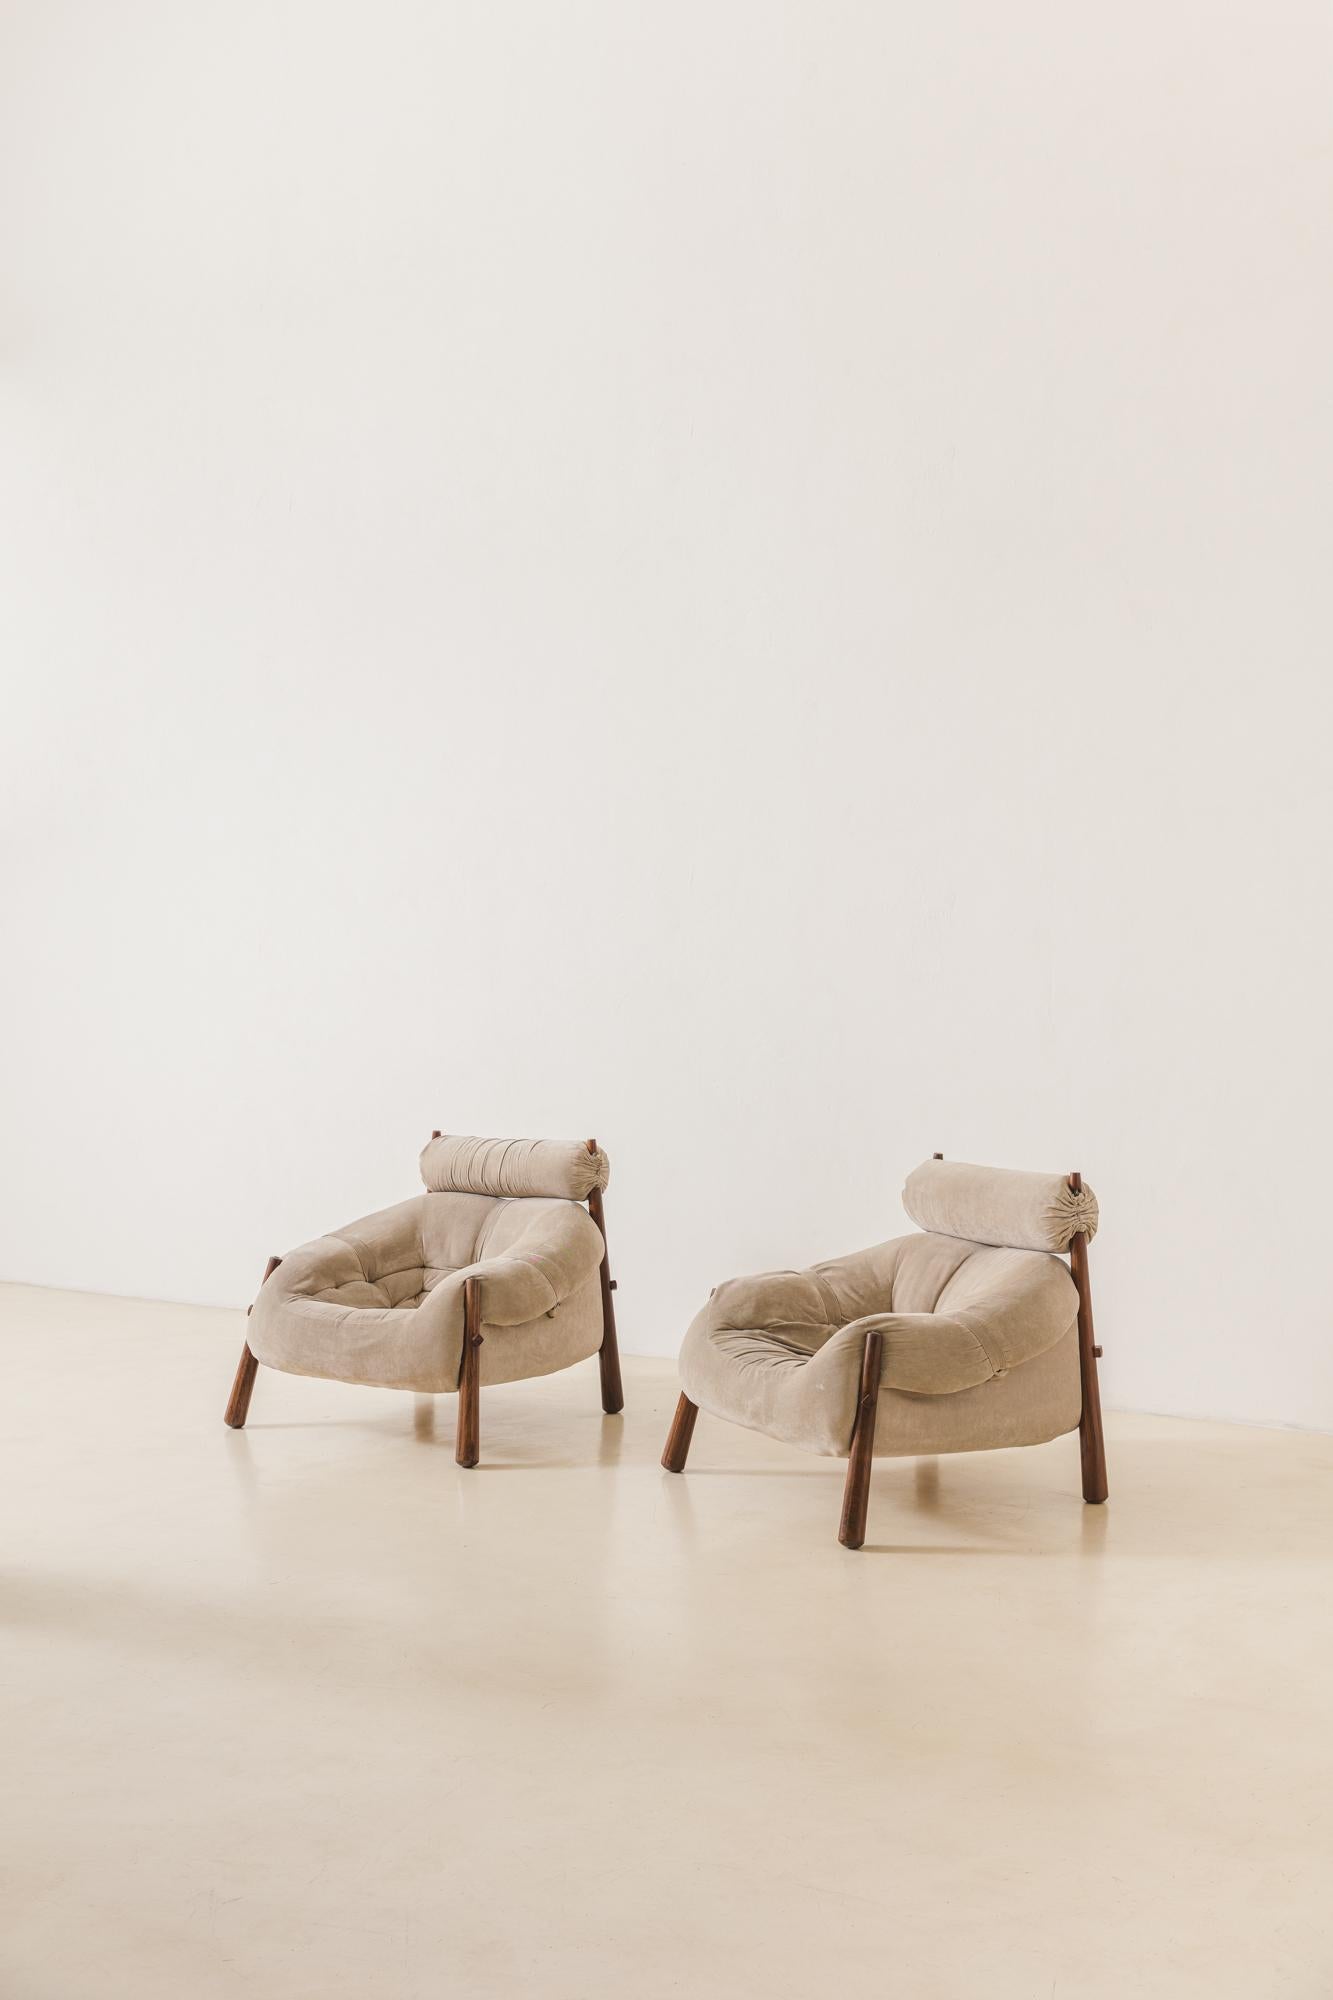 In his designs, Percival Lafer sought ergonomy and comfort. This pair of MP-81 lounge chairs by Percival Lafer comprises a solid wood structure with a single piece of seats and backs. Its unique design and construction make this an authentic